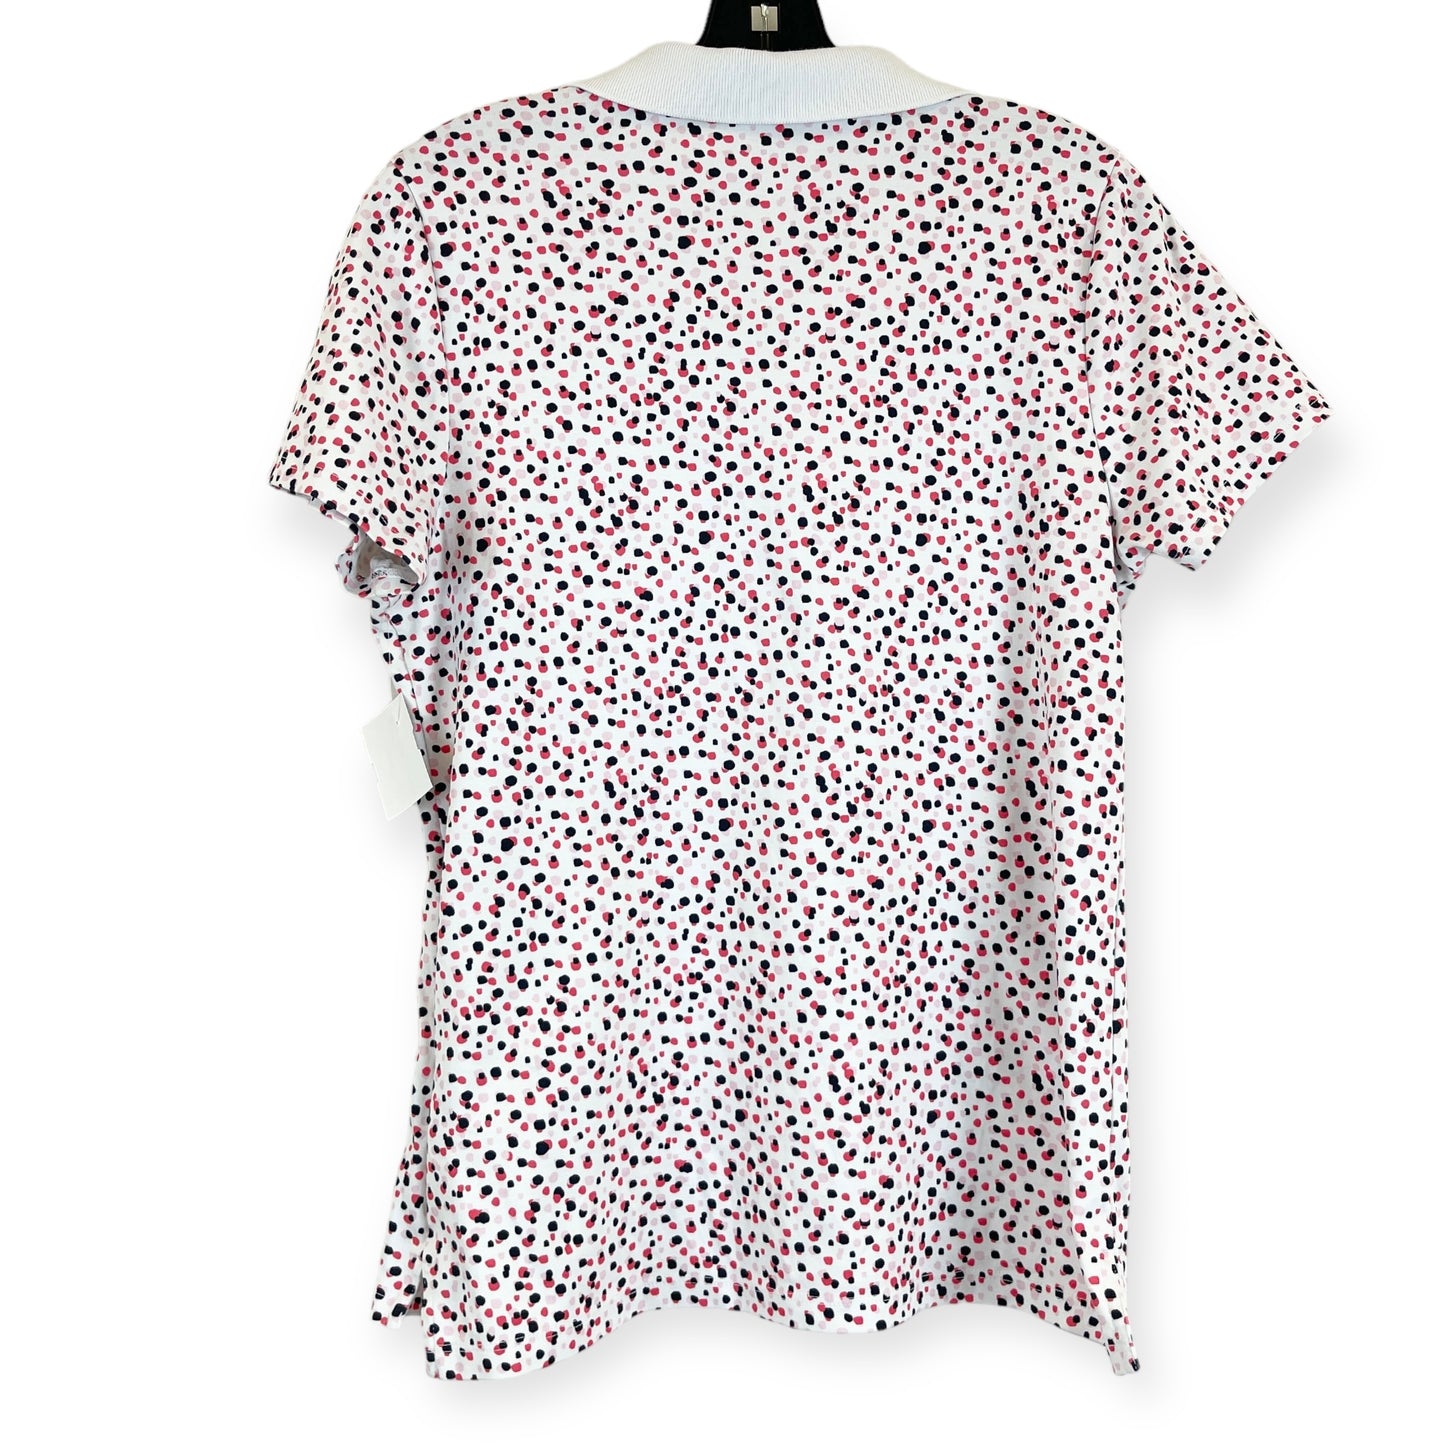 Top Short Sleeve By Lands End  Size: L | 14/16